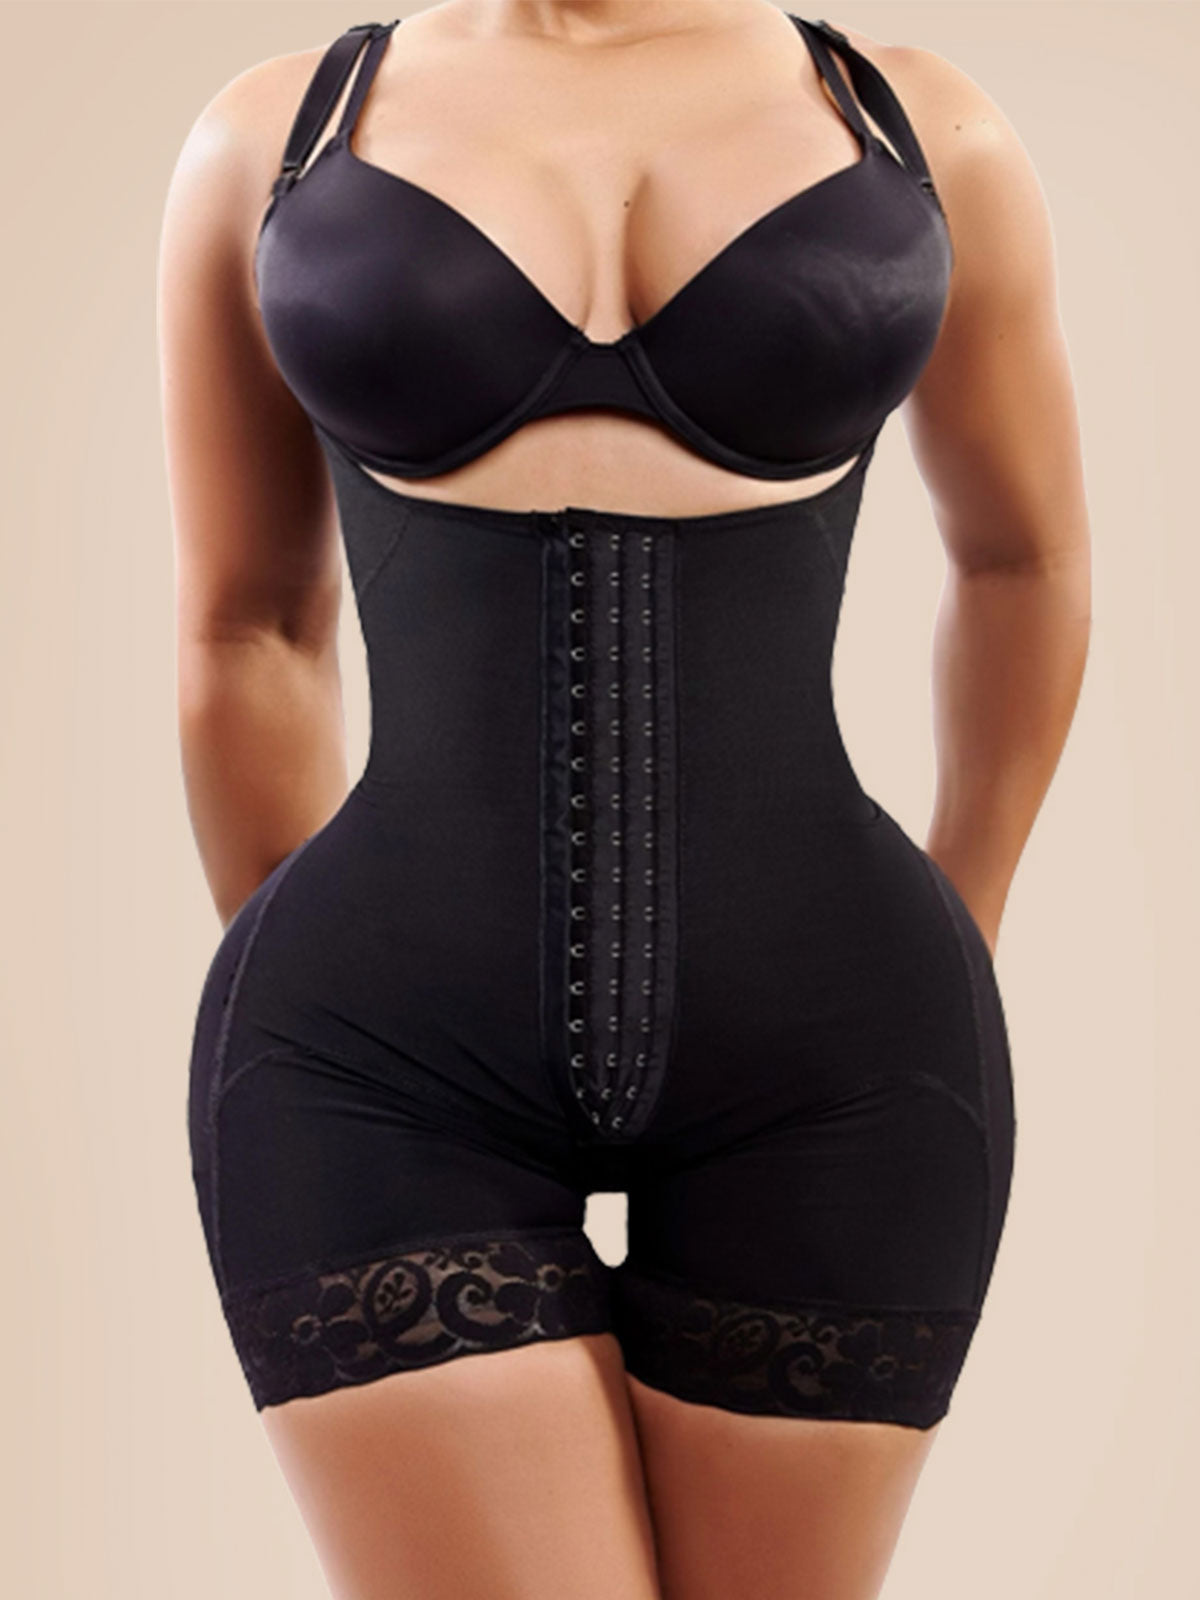 ChicCurve Stage 2 Faja  Effective Shapewear for Restoring Your